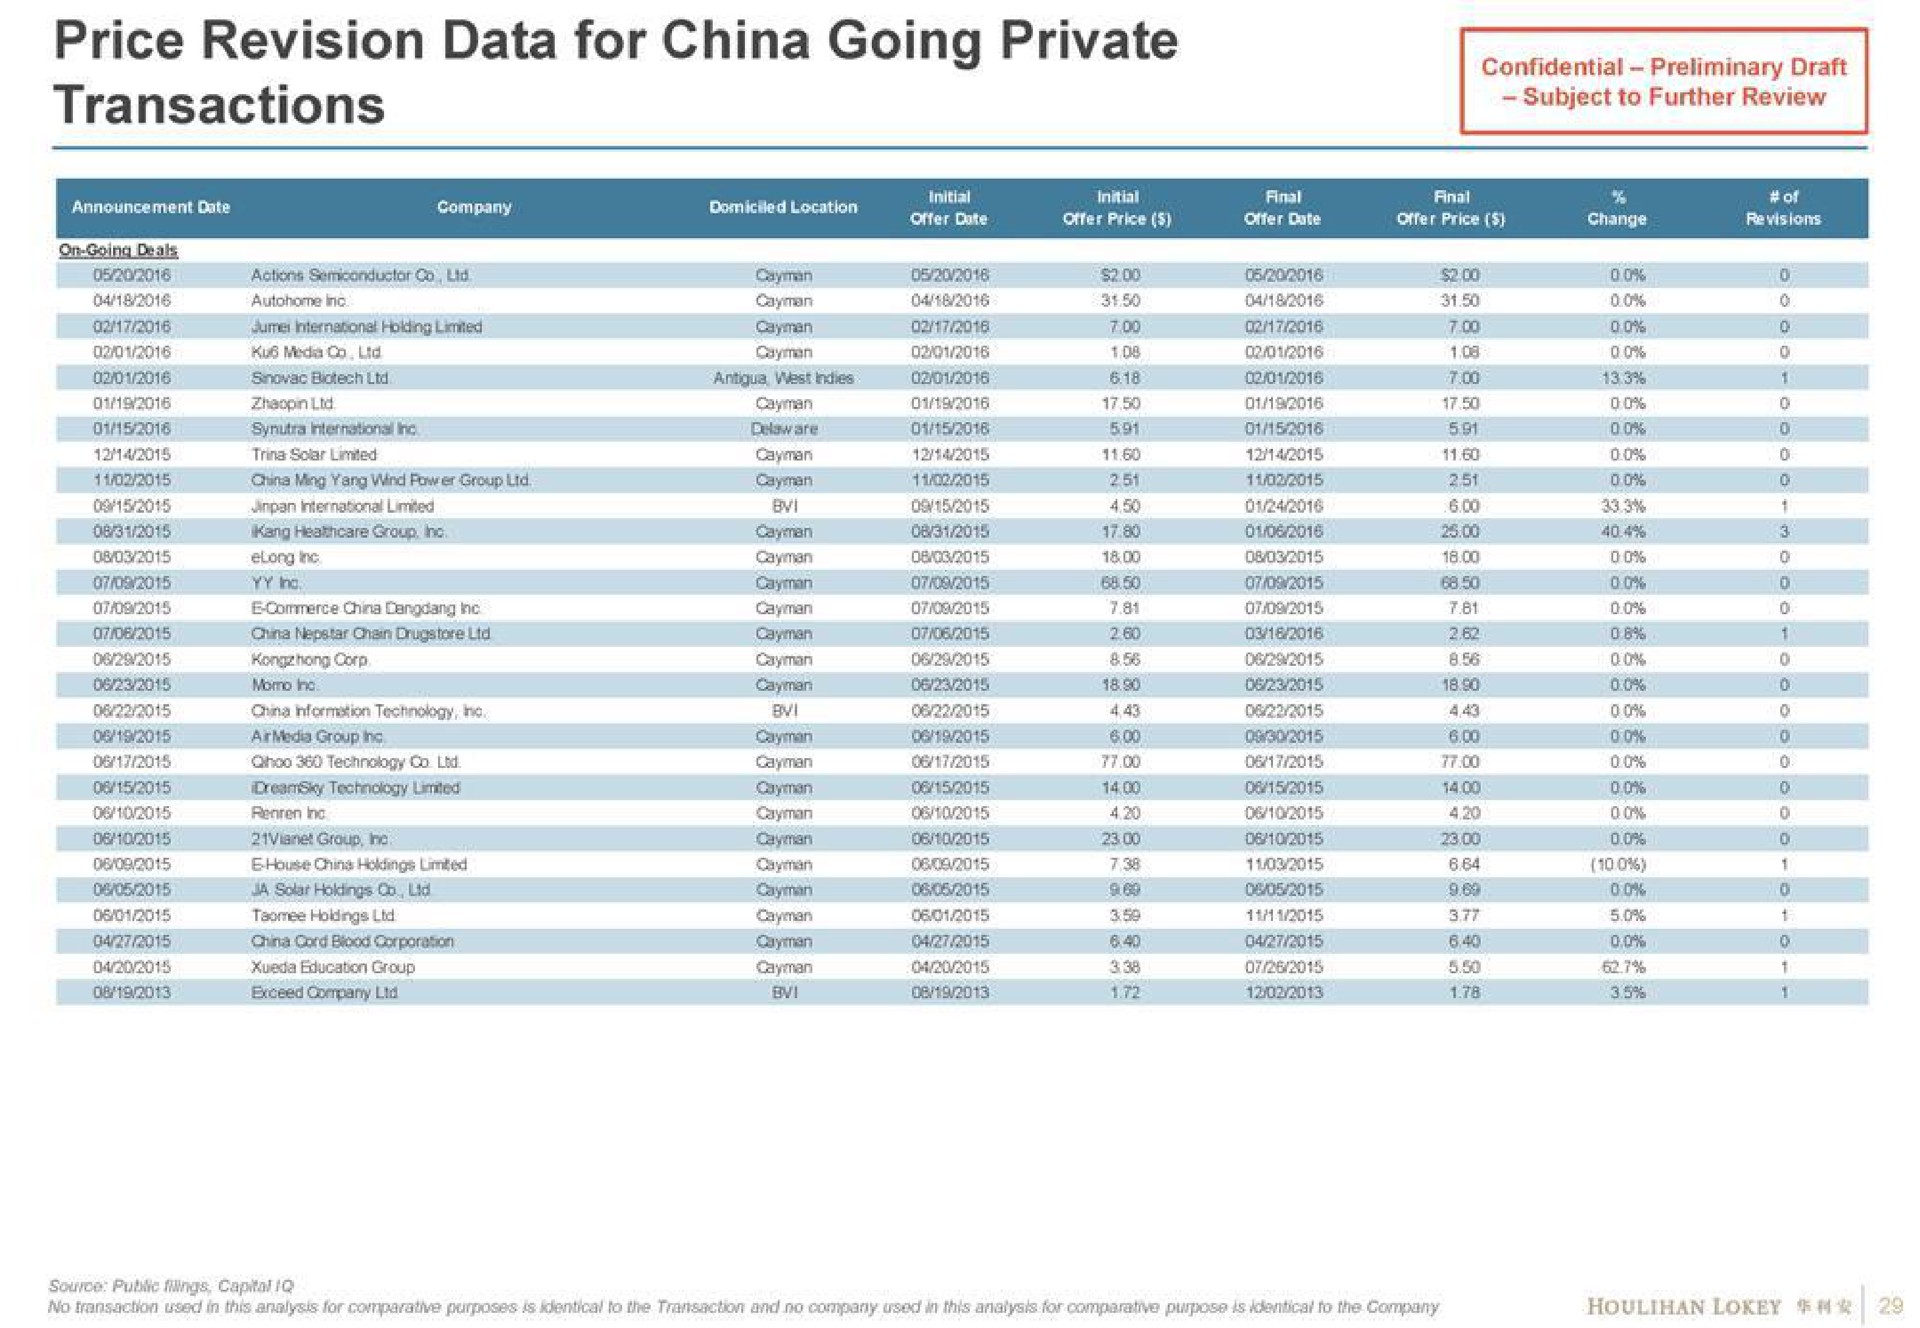 price revision data for china going private on going deals | Houlihan Lokey